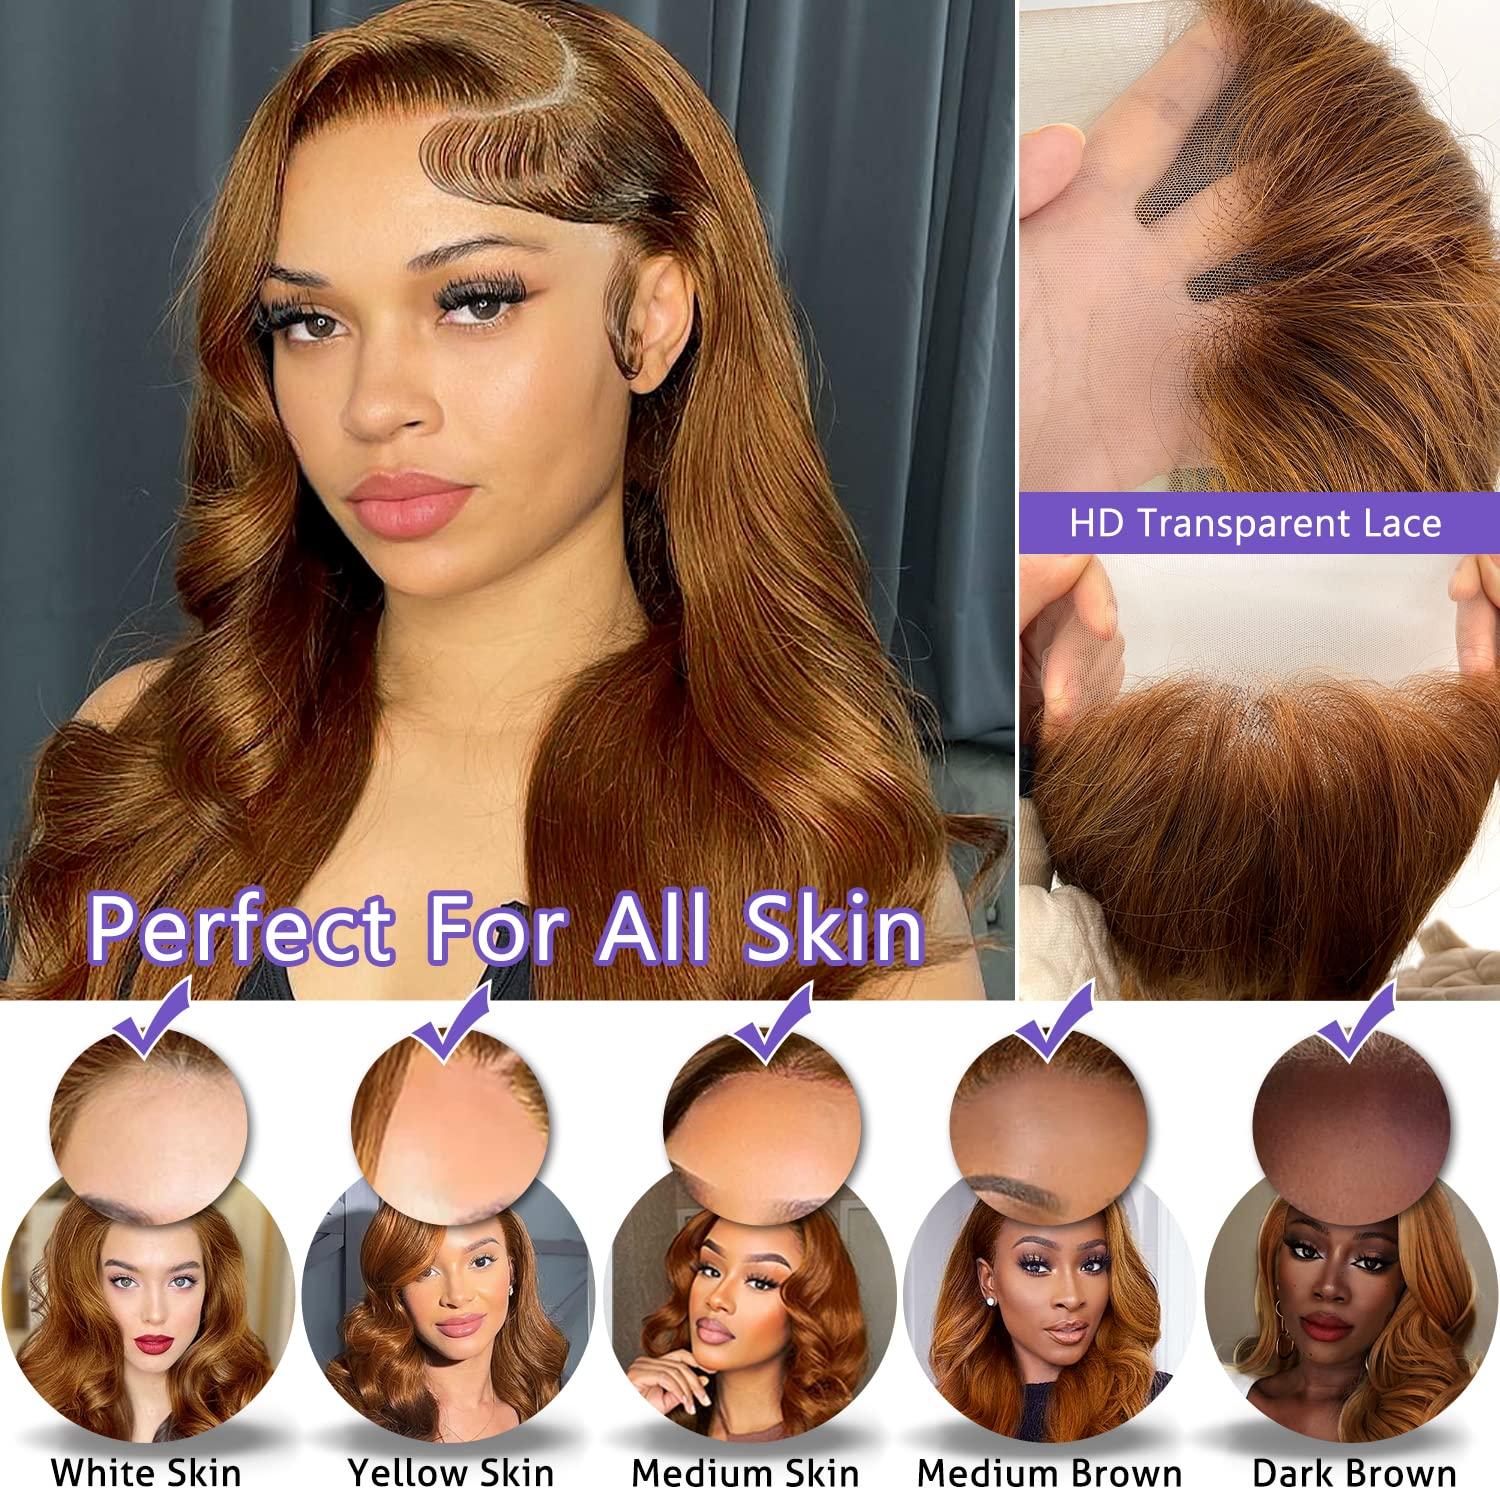 New Transparent Lace Wig Install For Brown Skin